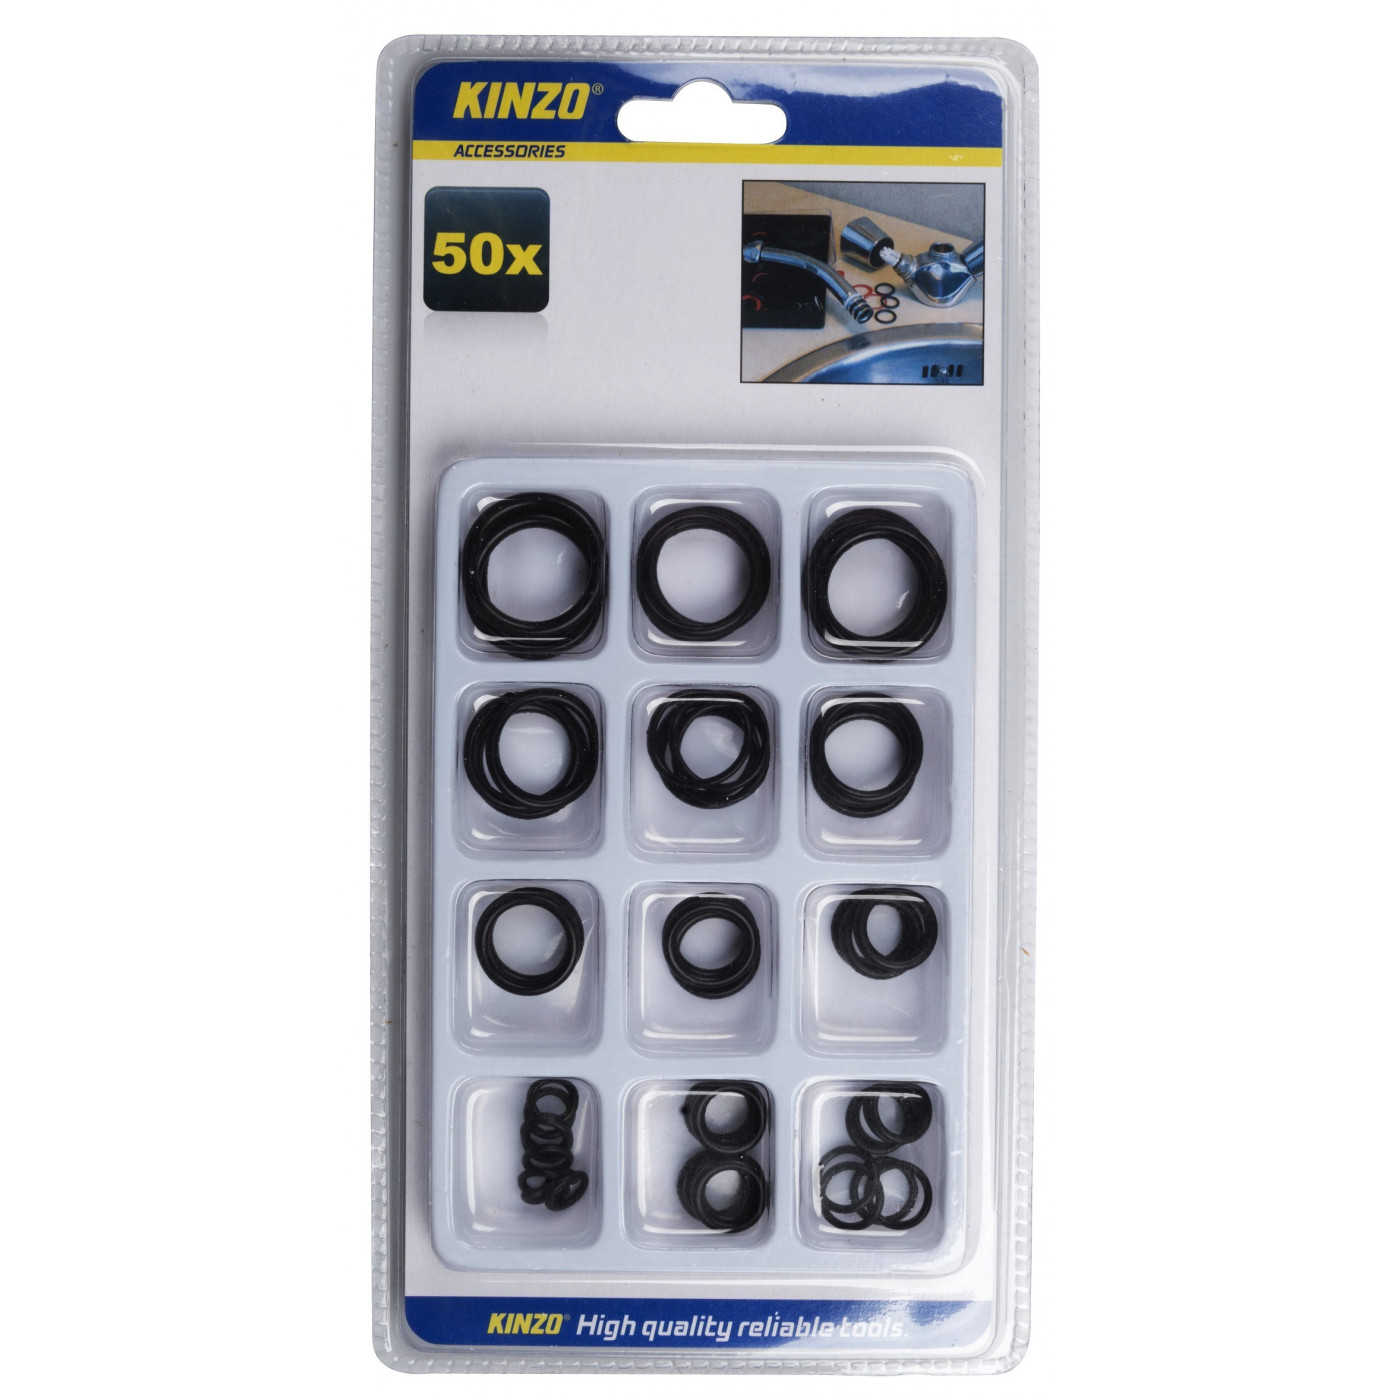 Set of 50 rubber rings in a box